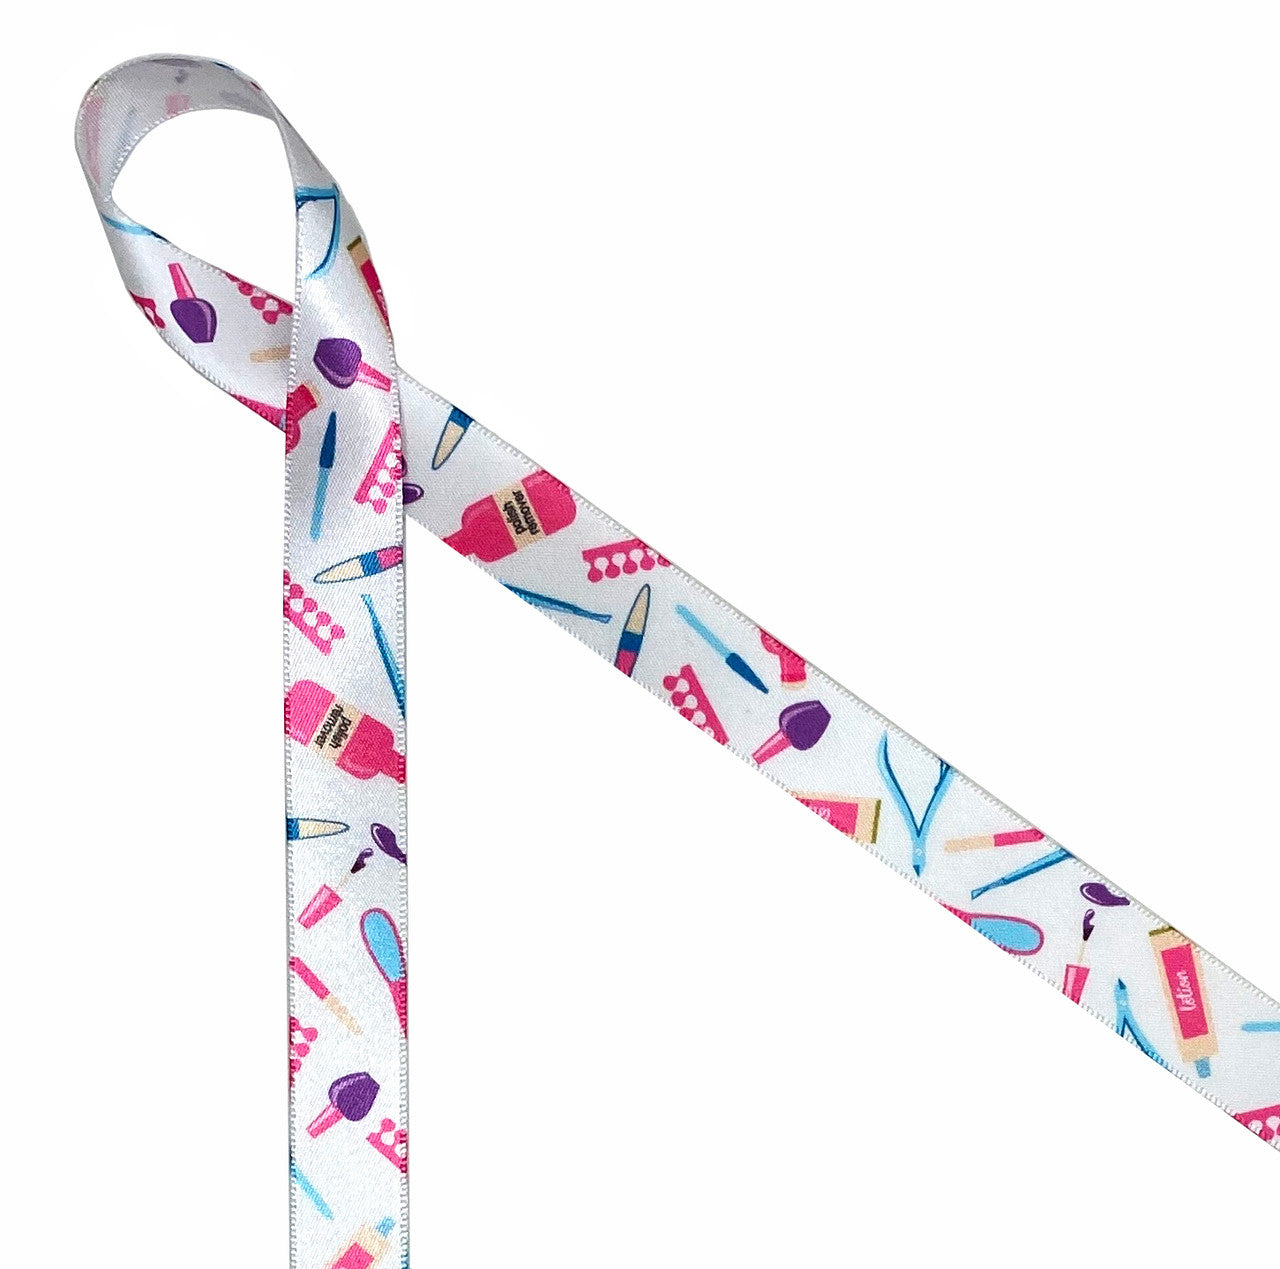 Manicure themed ribbon featuring purple nail polish, nail files, pink toe separators, clippers, buffers and more tools of the trade printed on 5/8" white single face satin. This is such a fun ribbon for spa themed parties, gifts and bridal showers!